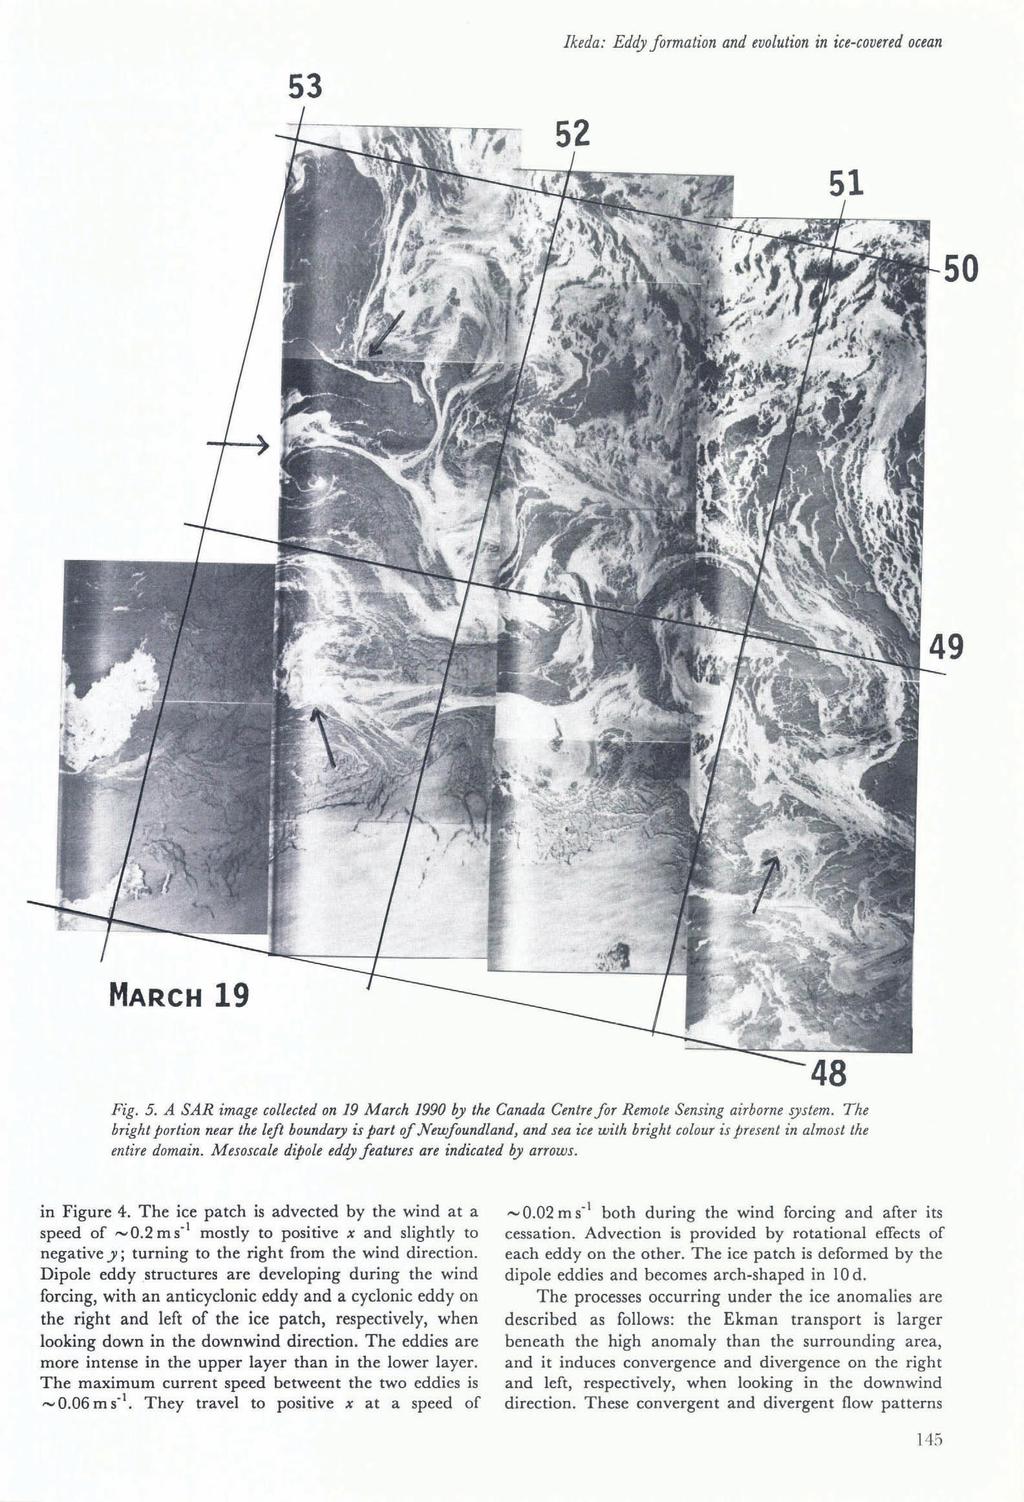 53 Ikeda: Eddy formation and evolution in ice-covered ocean 50 MARCH 19 Fig. 5. A SAR image collected on 19 March 1990 by the Canada Centre for Remote Sensing airborne system.